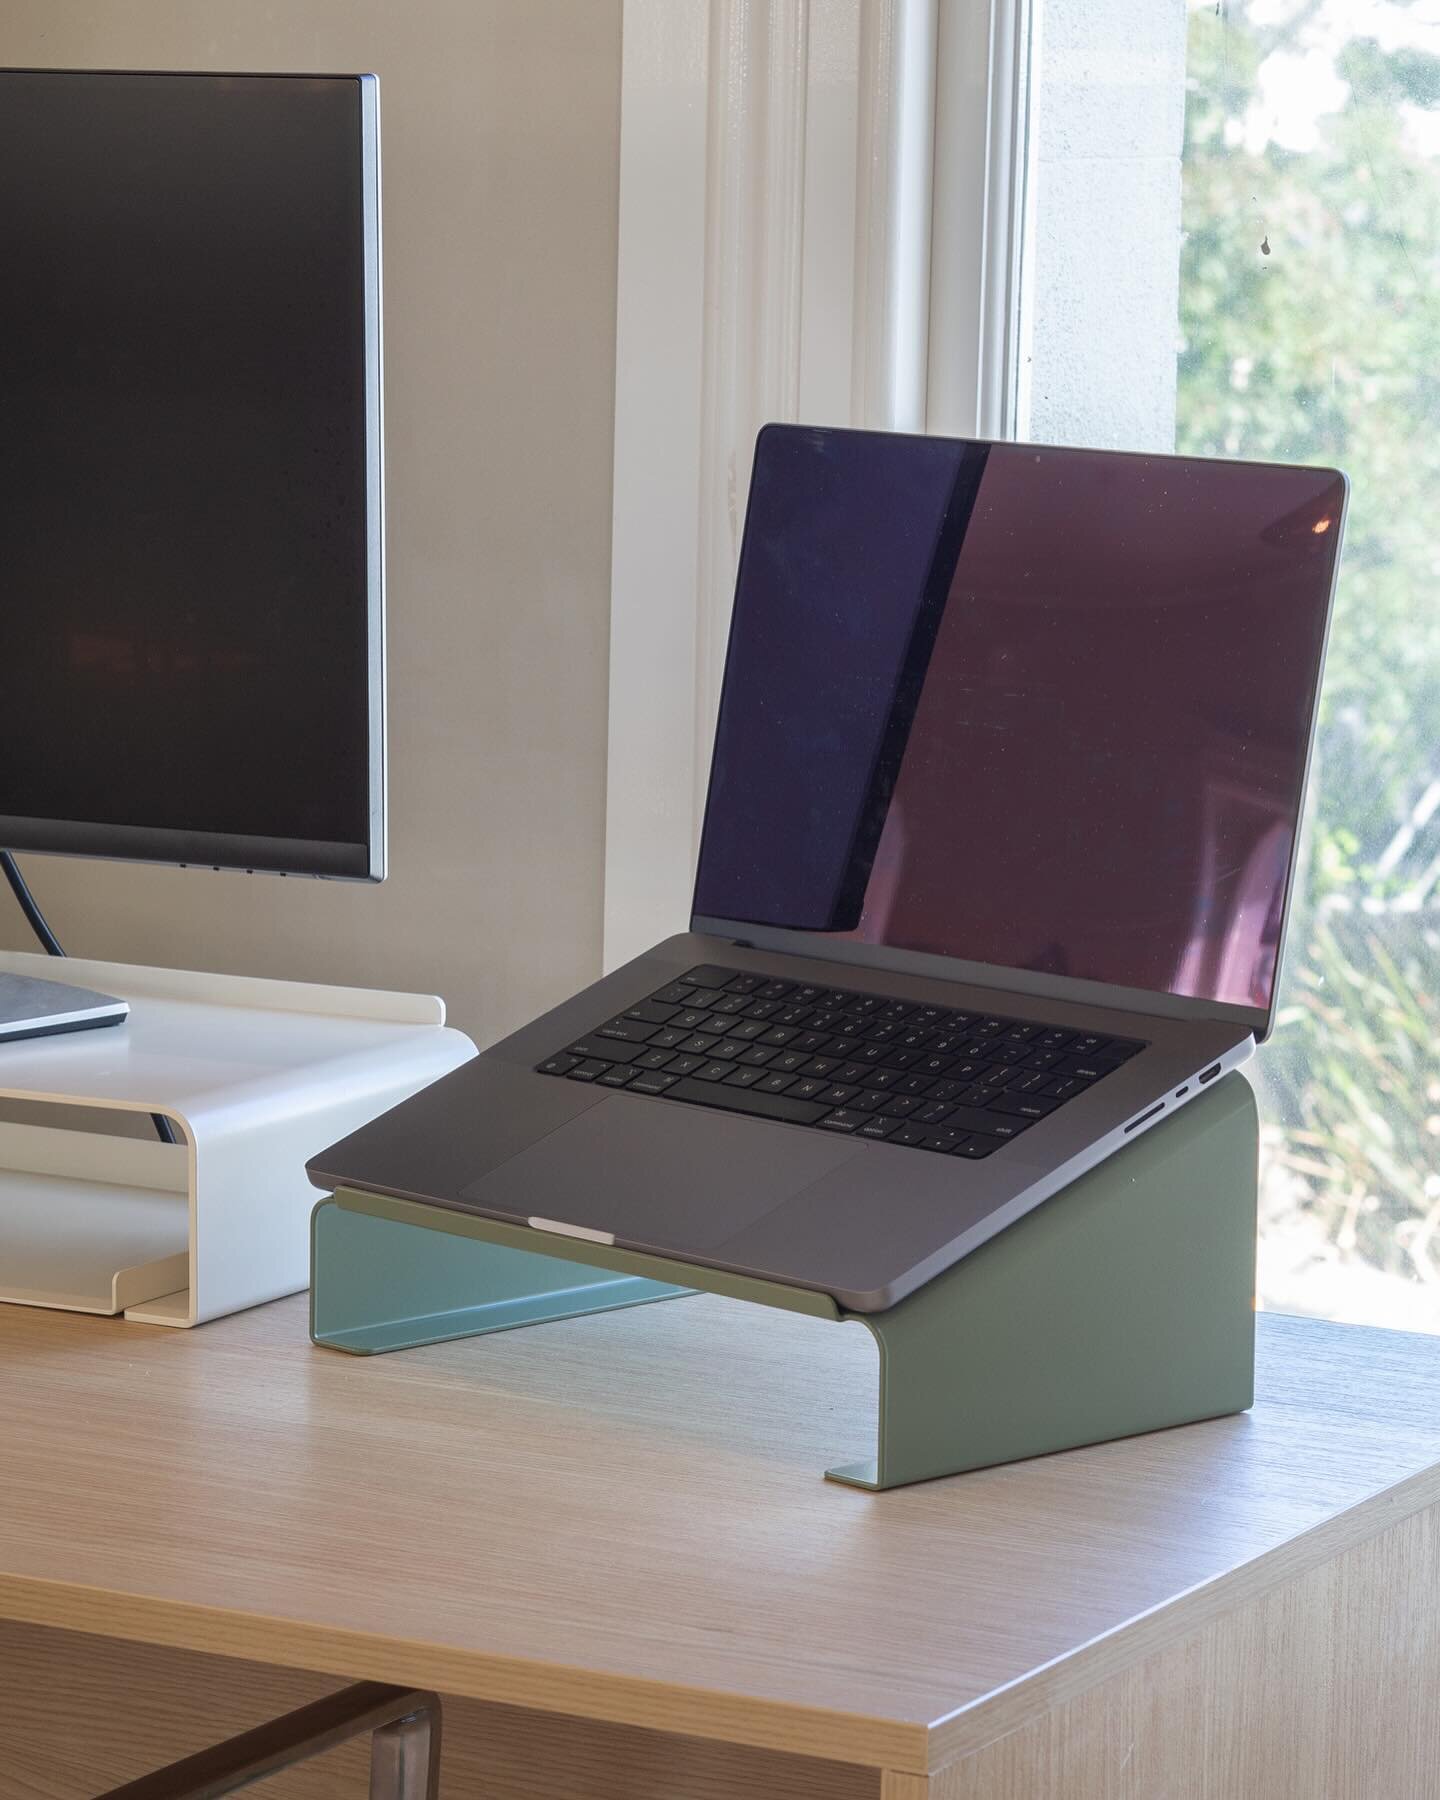 Back to work after the long weekend with the &lsquo;Workmate Laptop Stand&rsquo; 💻 

The Workmate is designed and manufactured in Auckland, New Zealand. It is seen here in a durable &lsquo;Mist Green&rsquo; powder-coat finish.

#oddthing #nzmade #de